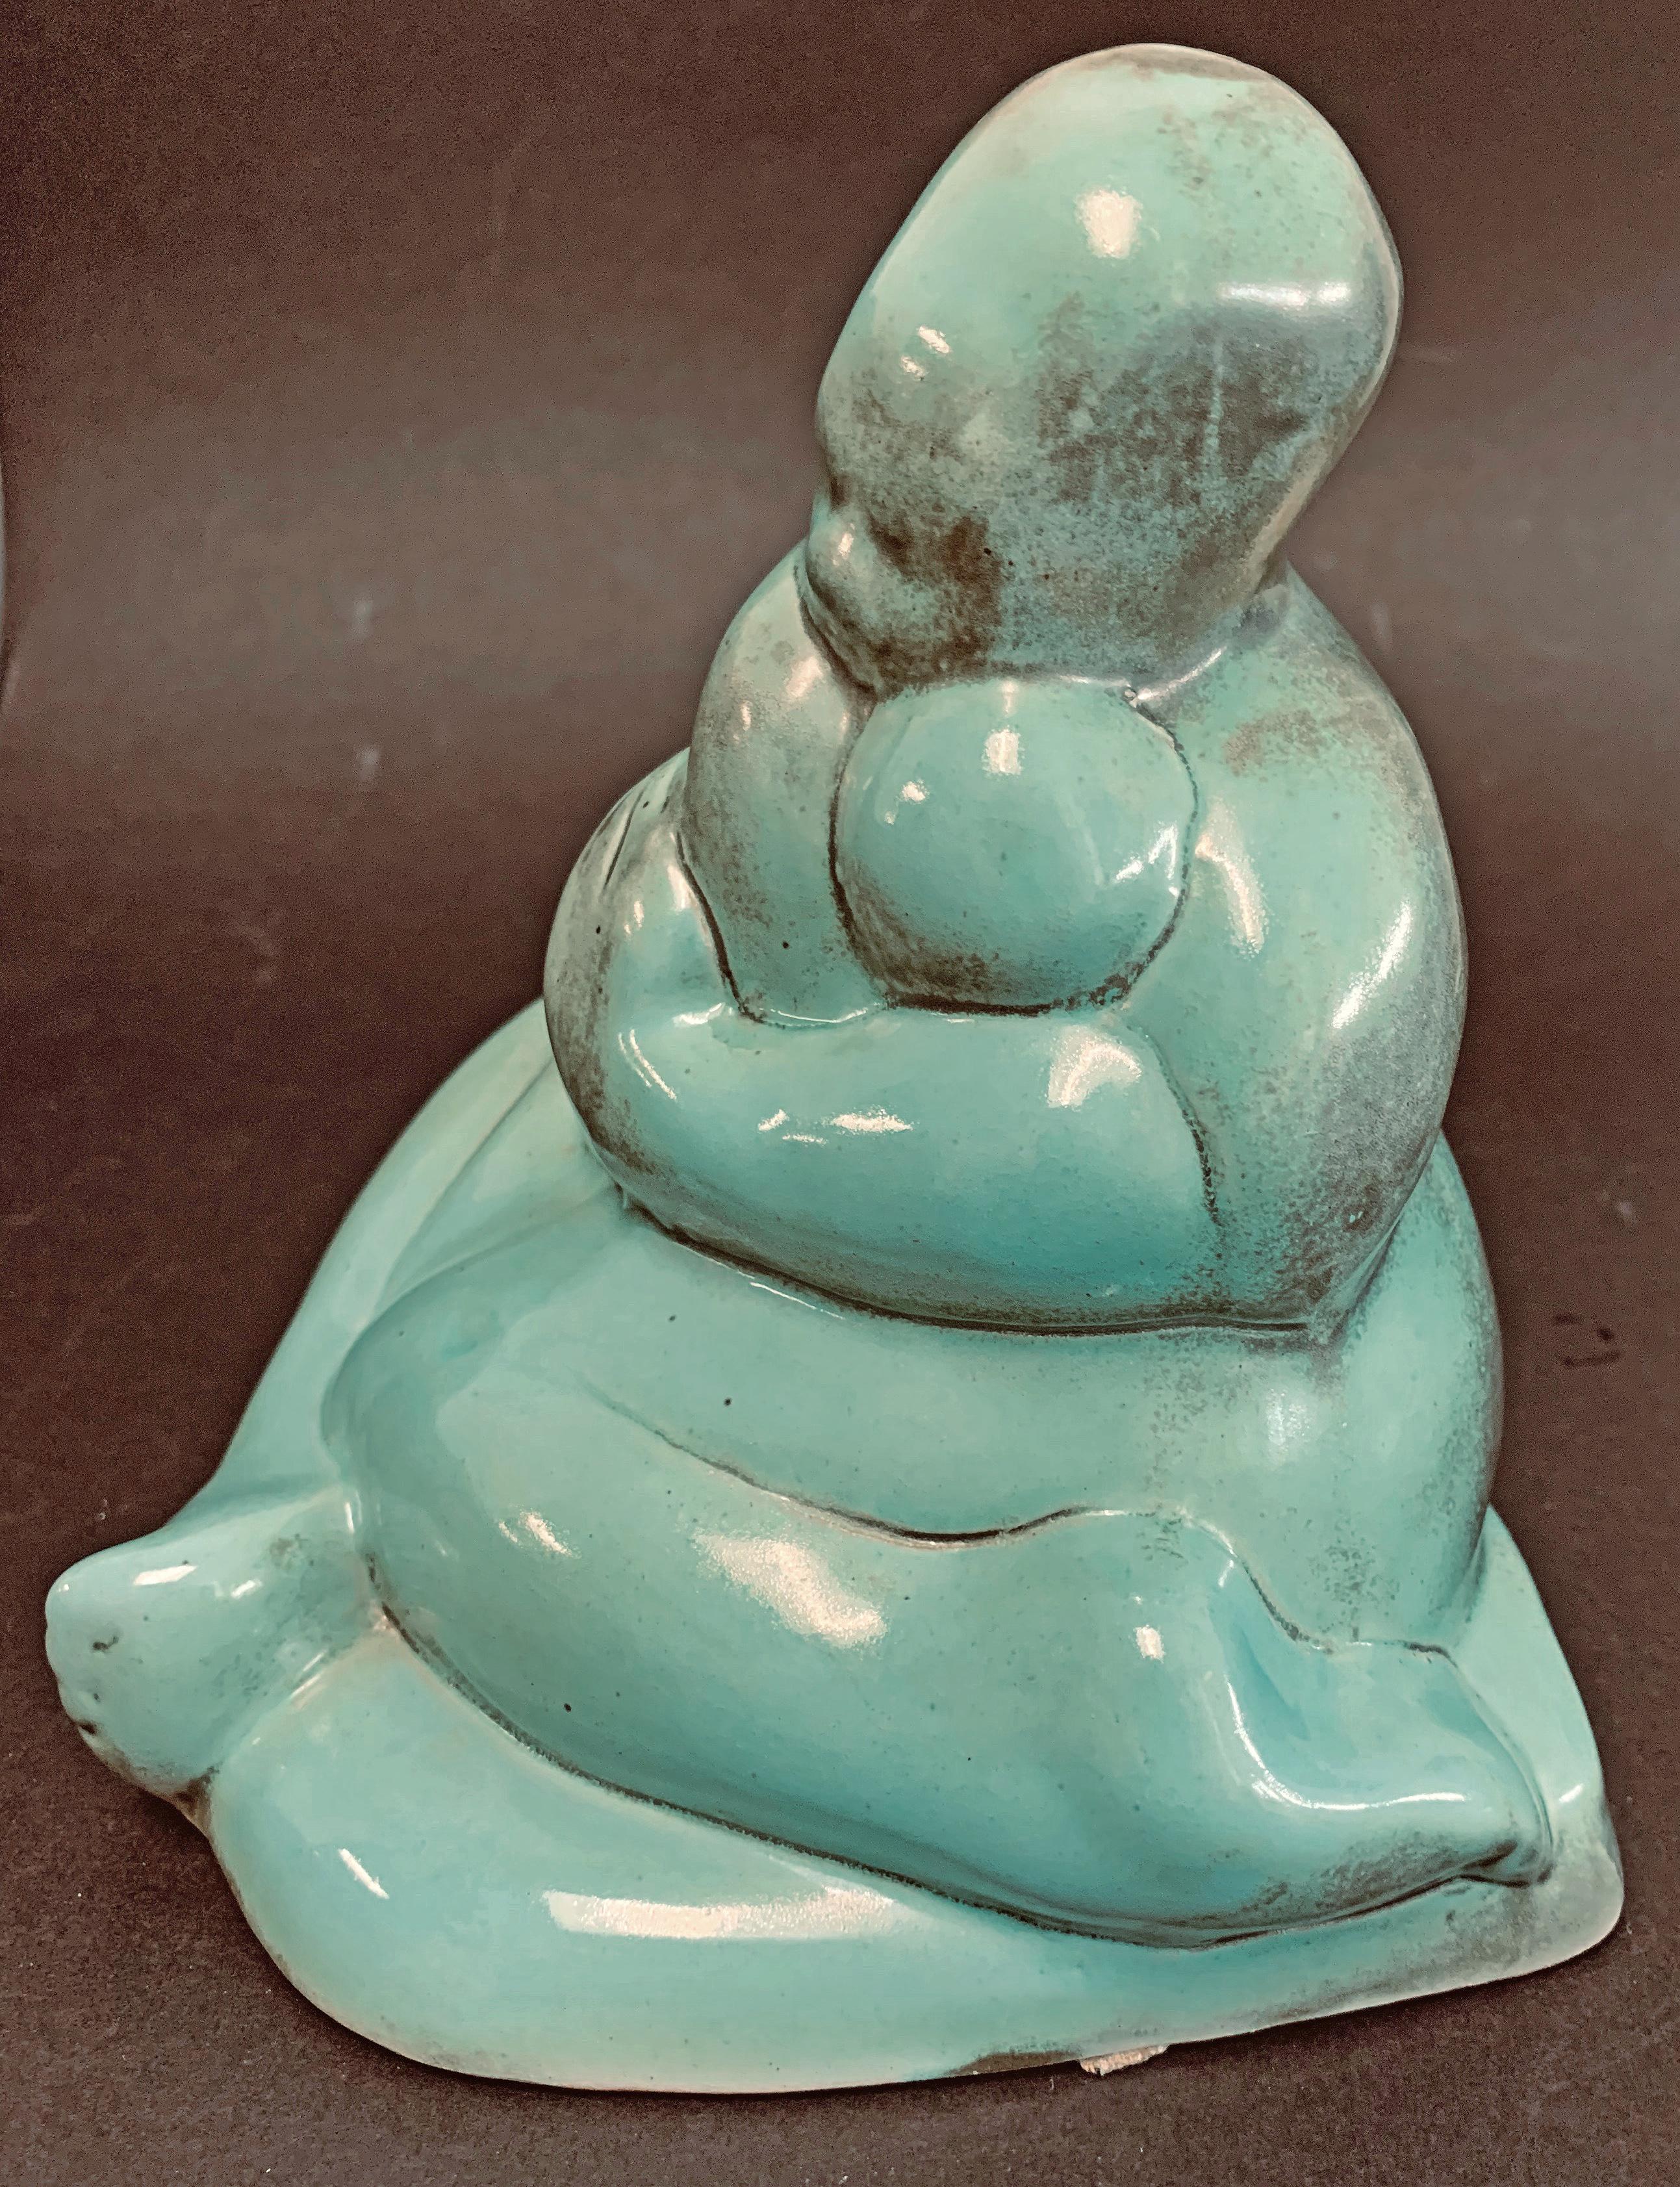 Stylized and reductive, this beautiful 1930s-vintage ceramic sculpture depicts a sitting mother holding her child very close, her legs crossed and her arms enfolding the baby. The warm turquoise color is highlighted with areas of charcoal-hued